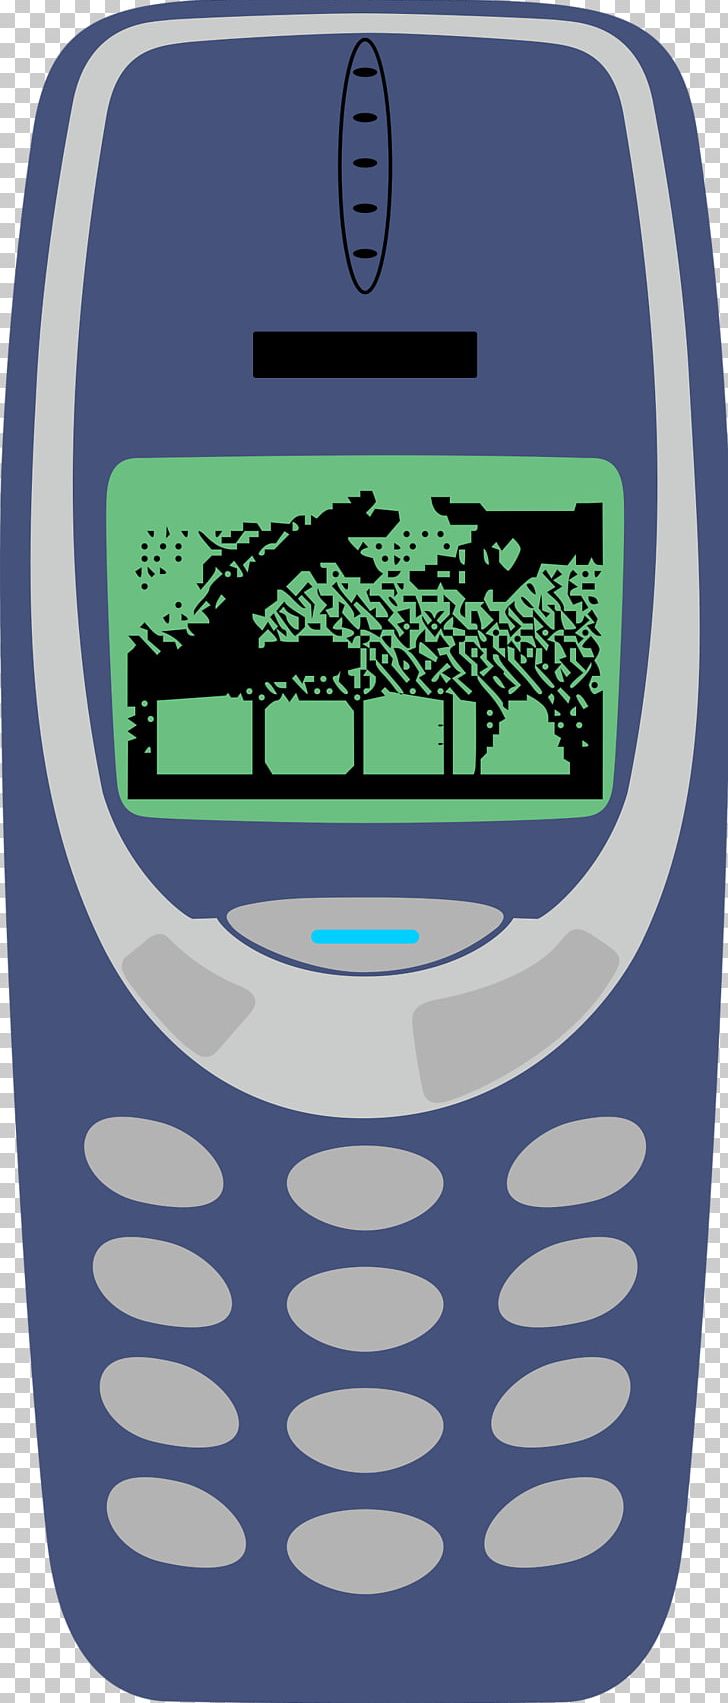 Nokia 3310 (2017) Nokia 2700 Classic Nokia 2730 Classic Telephone PNG, Clipart, Blue, Cell, Cellphone, Cell Phone, Cellular Network Free PNG Download